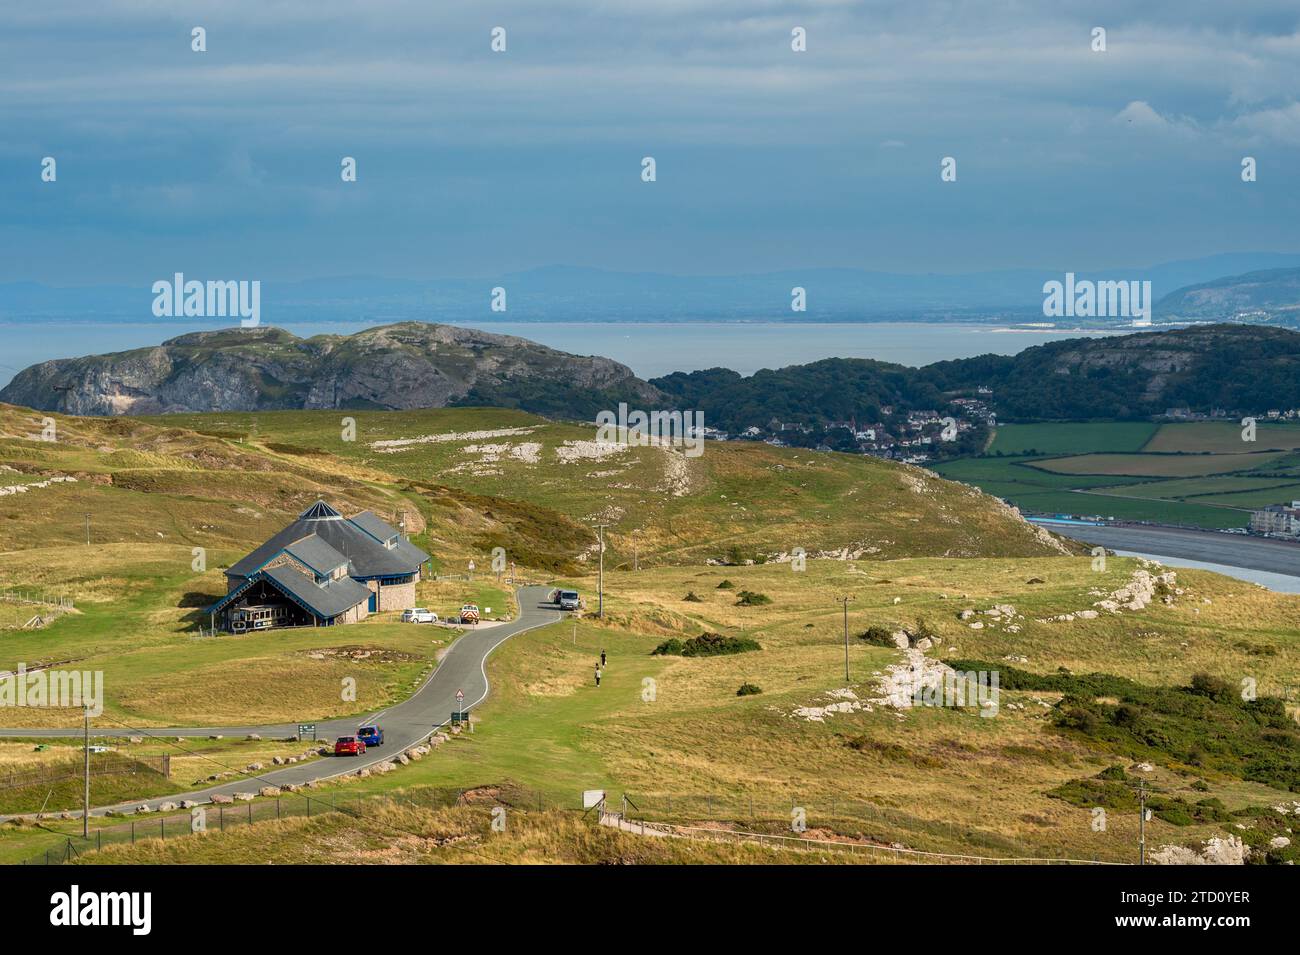 Great Orme Tramway Halfway Station with Llandudno, North Wales, UK in the background. Stock Photo